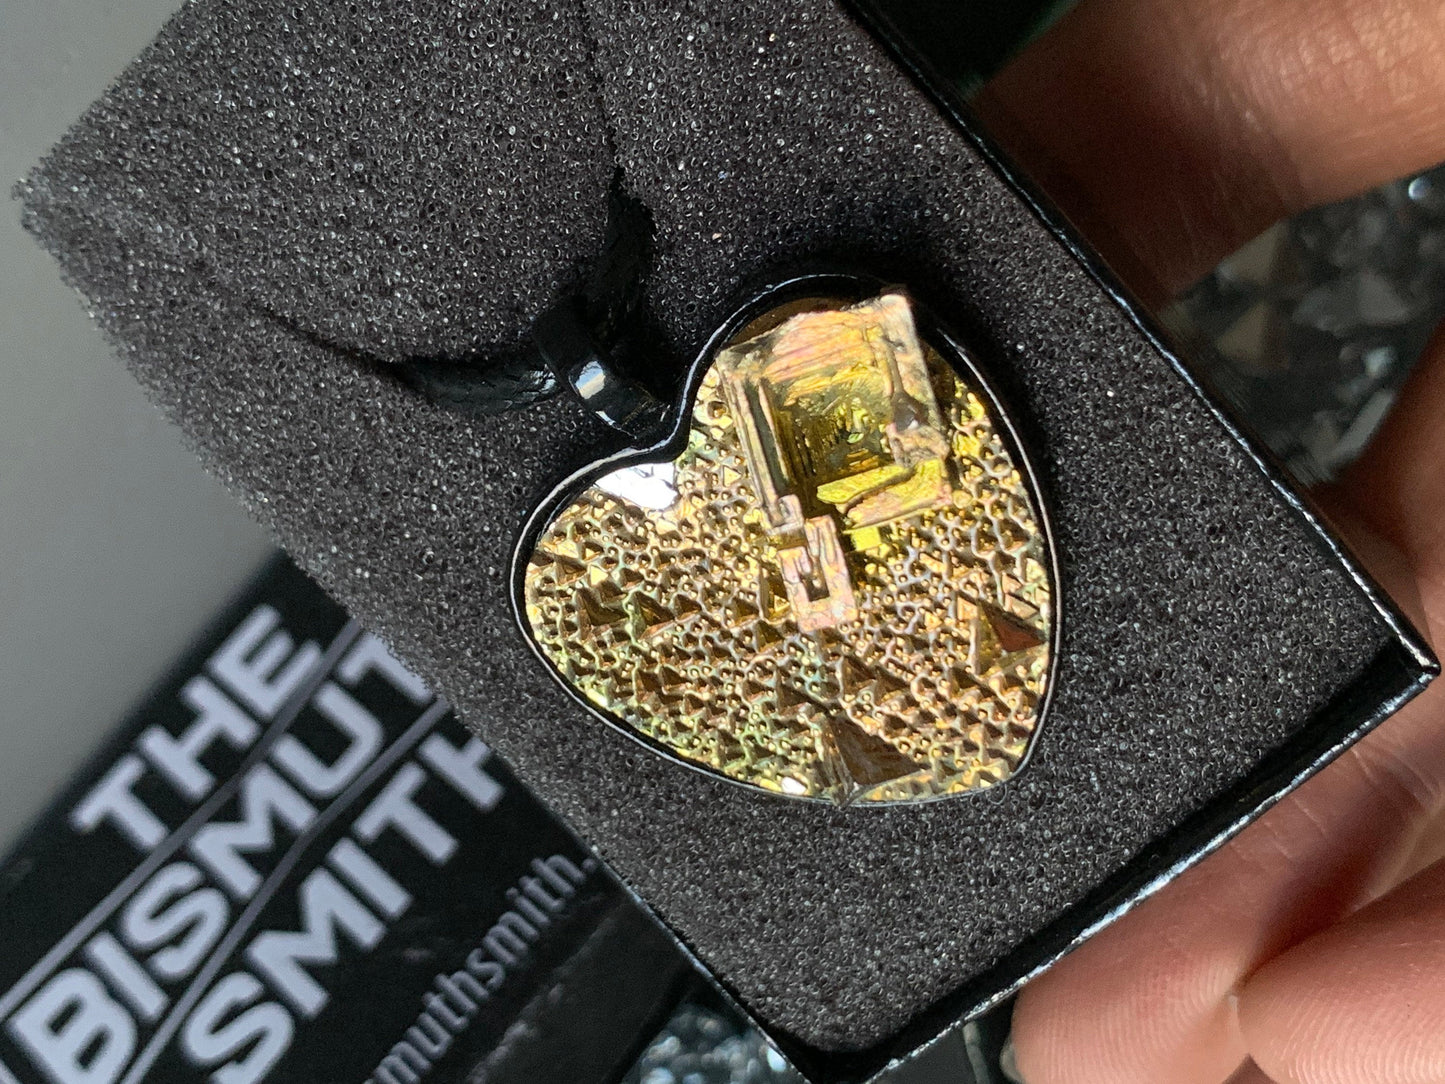 Gold Bismuth Heart Crystal Metal Art Cord Necklace